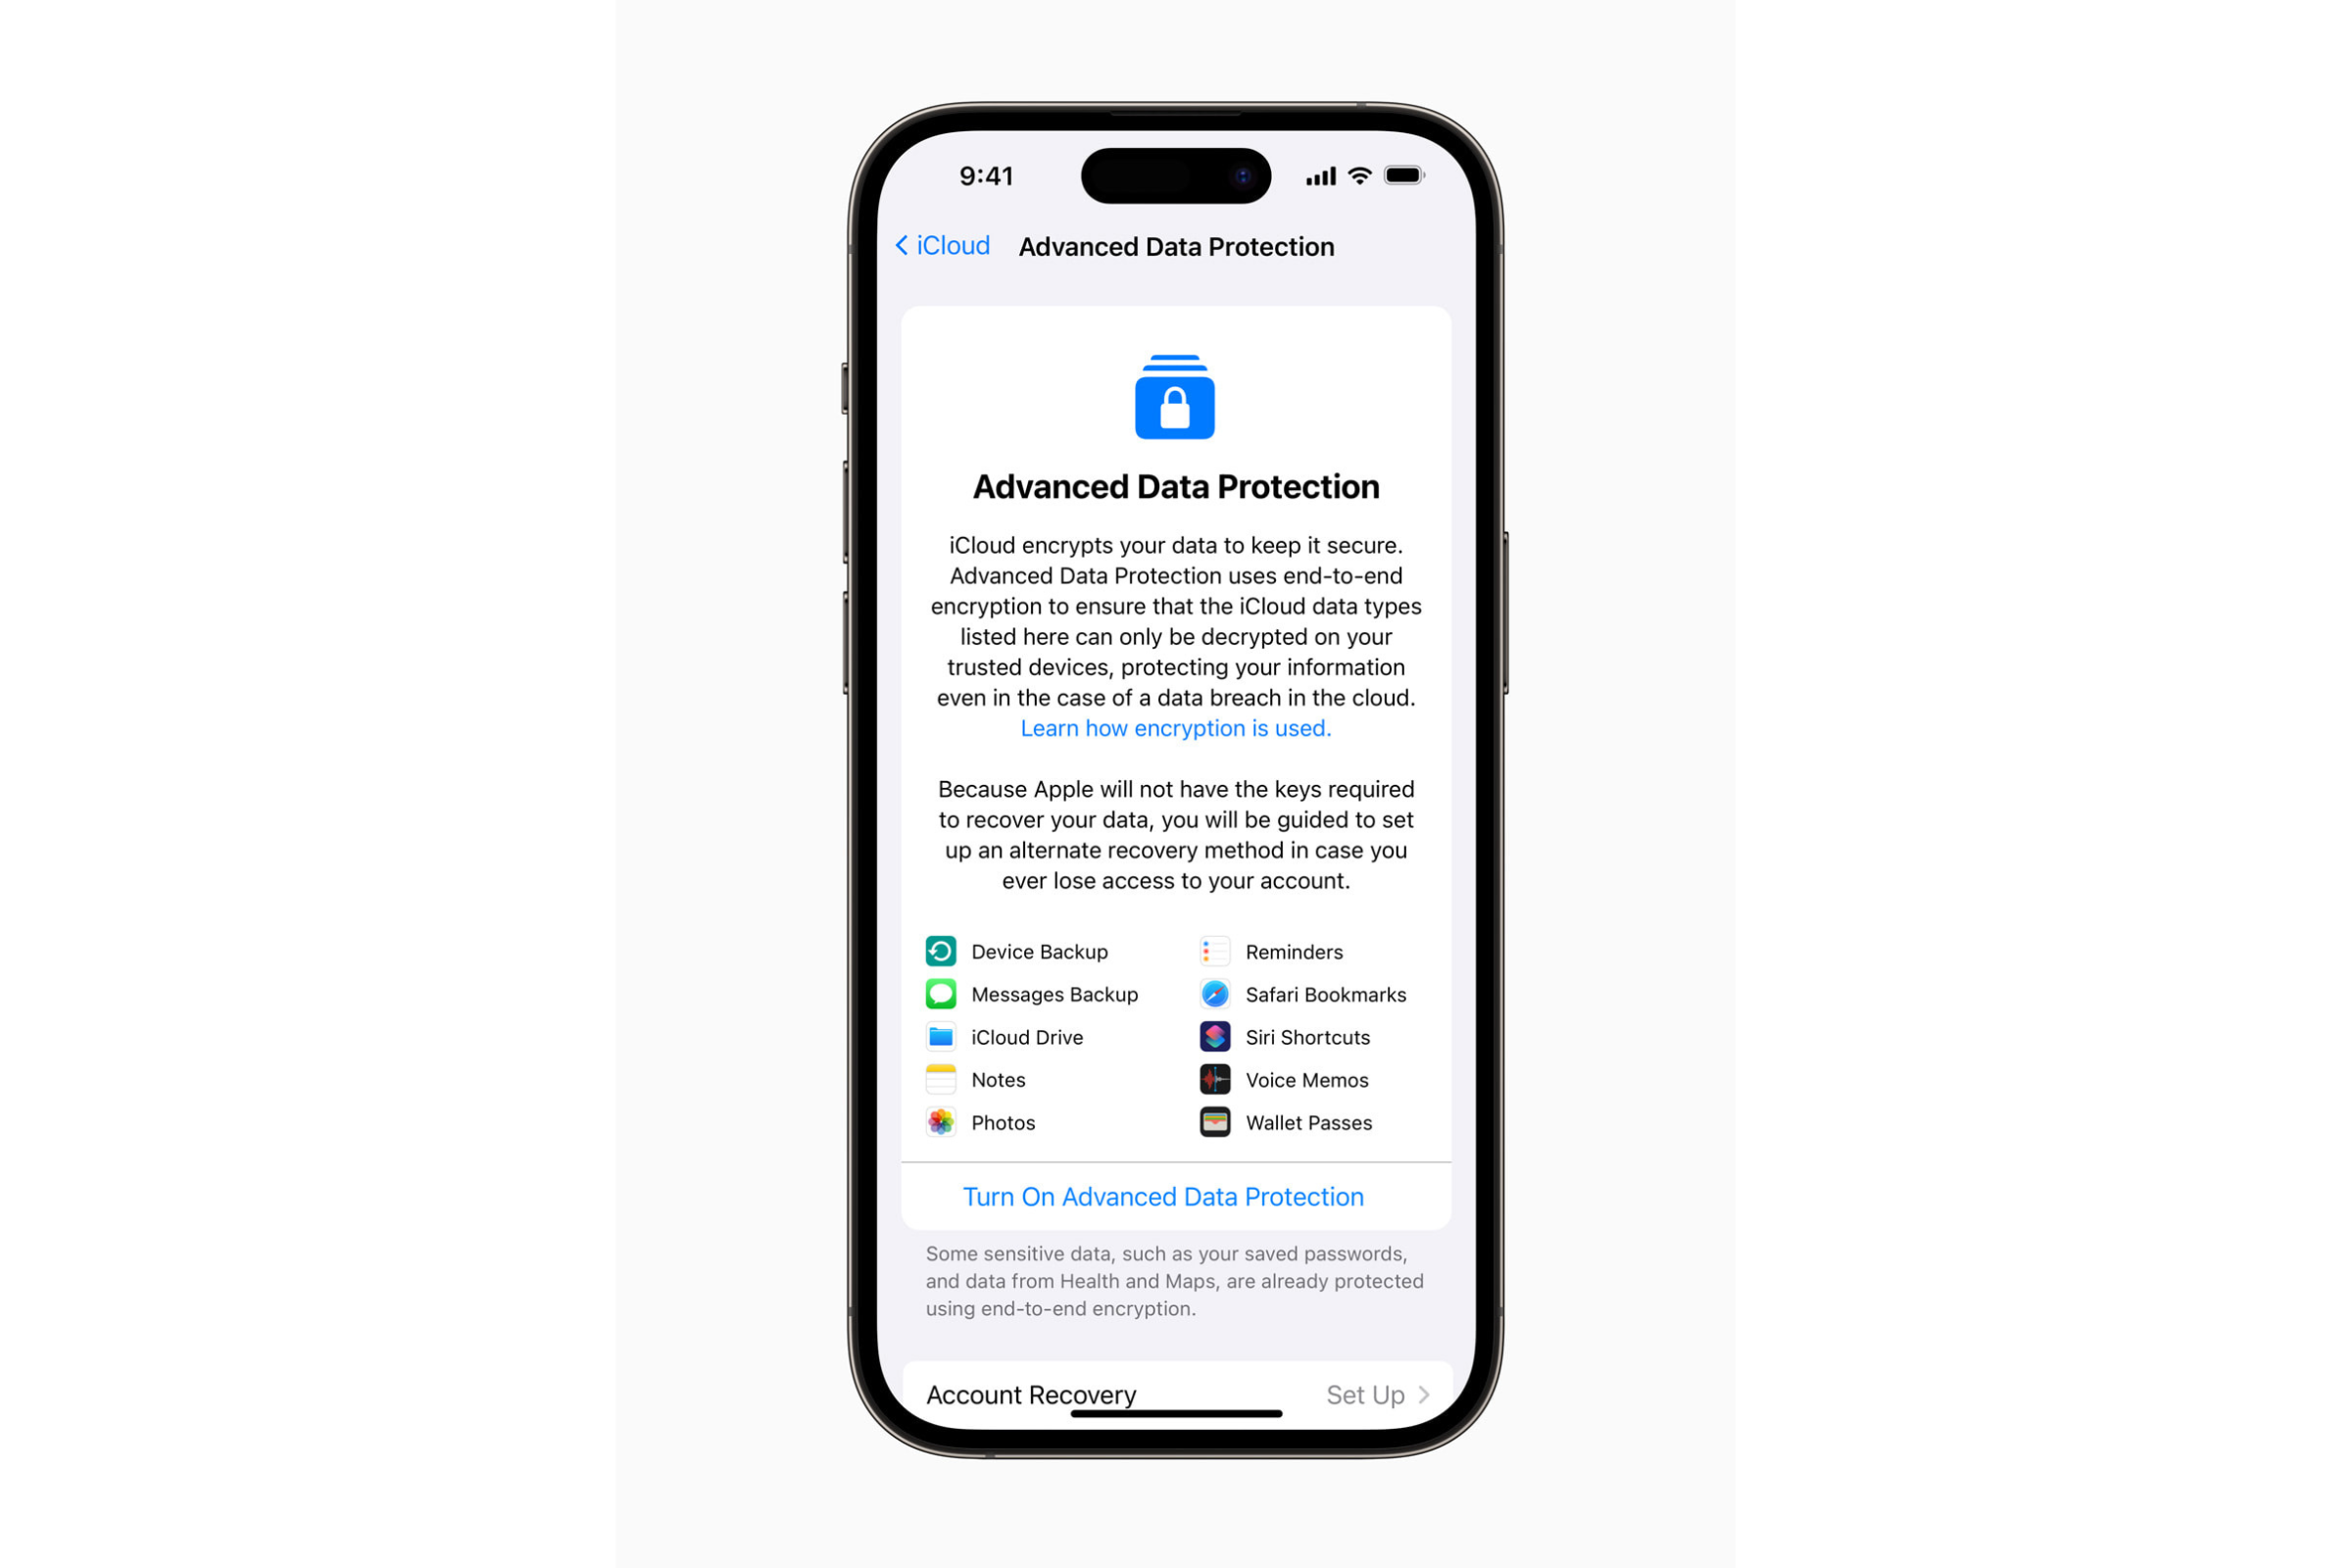 Advanced Data Protection for iCloud on an iPhone